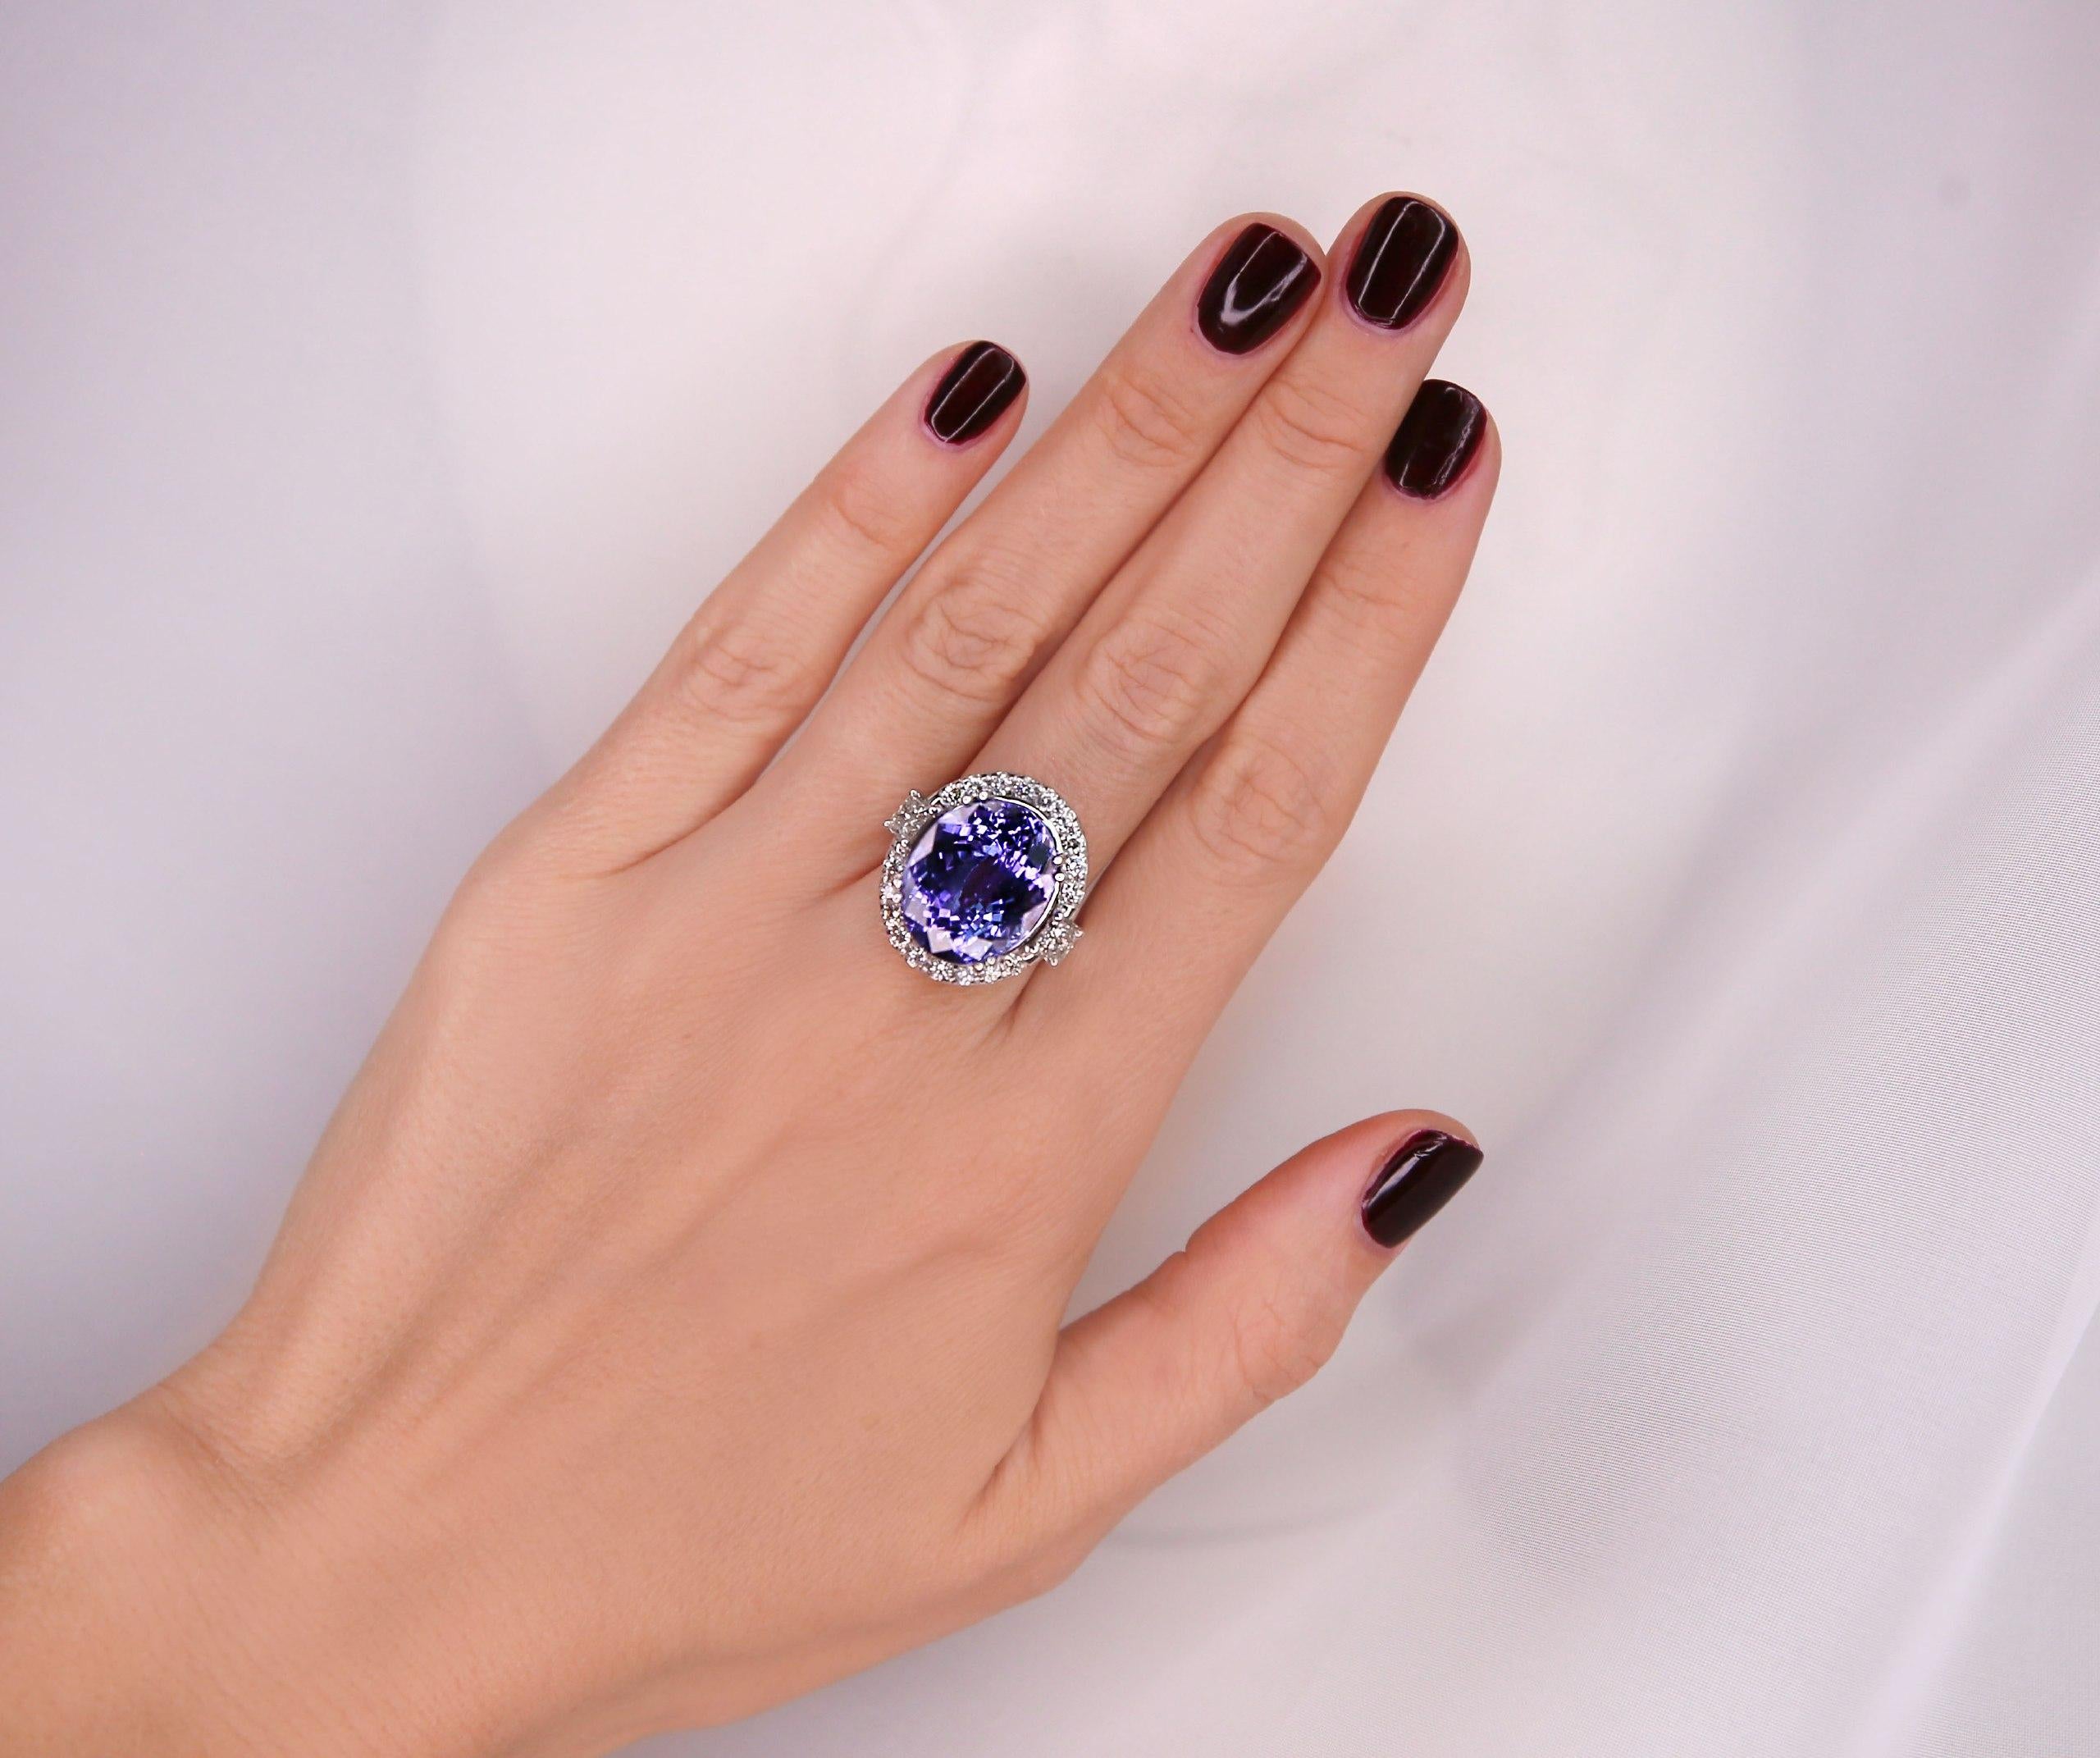 18K Solid White Gold Diamond Ring
Mainstone: Natural
Tanzanite 21.62 Carat 
Shape: Oval

Dimensions: 18.22x14.83 mm 
Treatment Method: Heat

Diamond
Color: F-G 
Clarity: VS2-SI1 
Weight: 1.30 Carat 

Shape: Round 
Natural 
Not-treated 

Total Metal